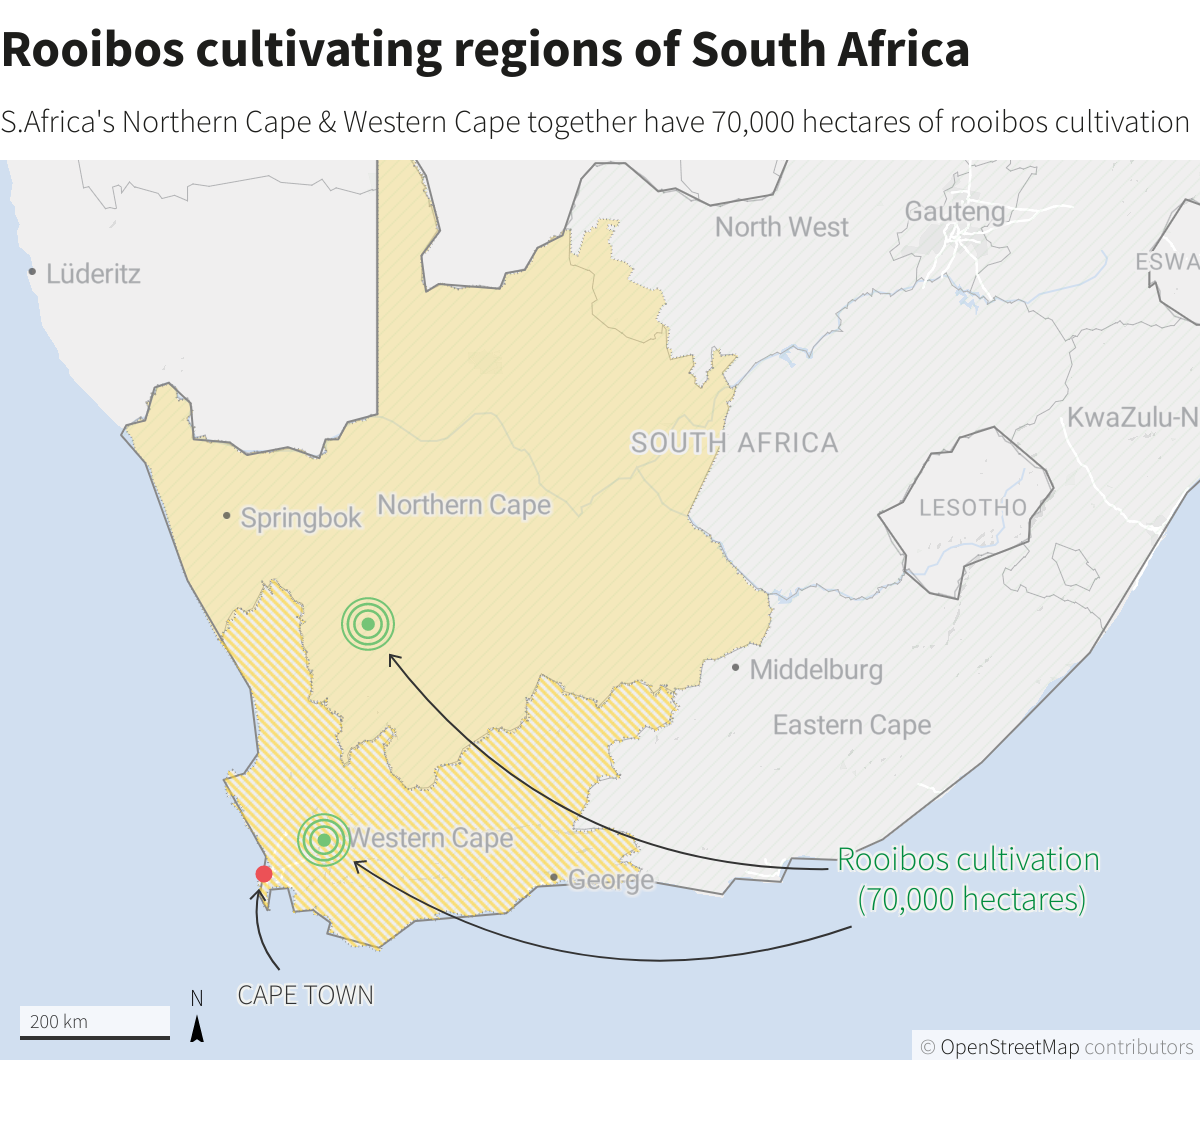 Rooibos cultivating regions of South Africa